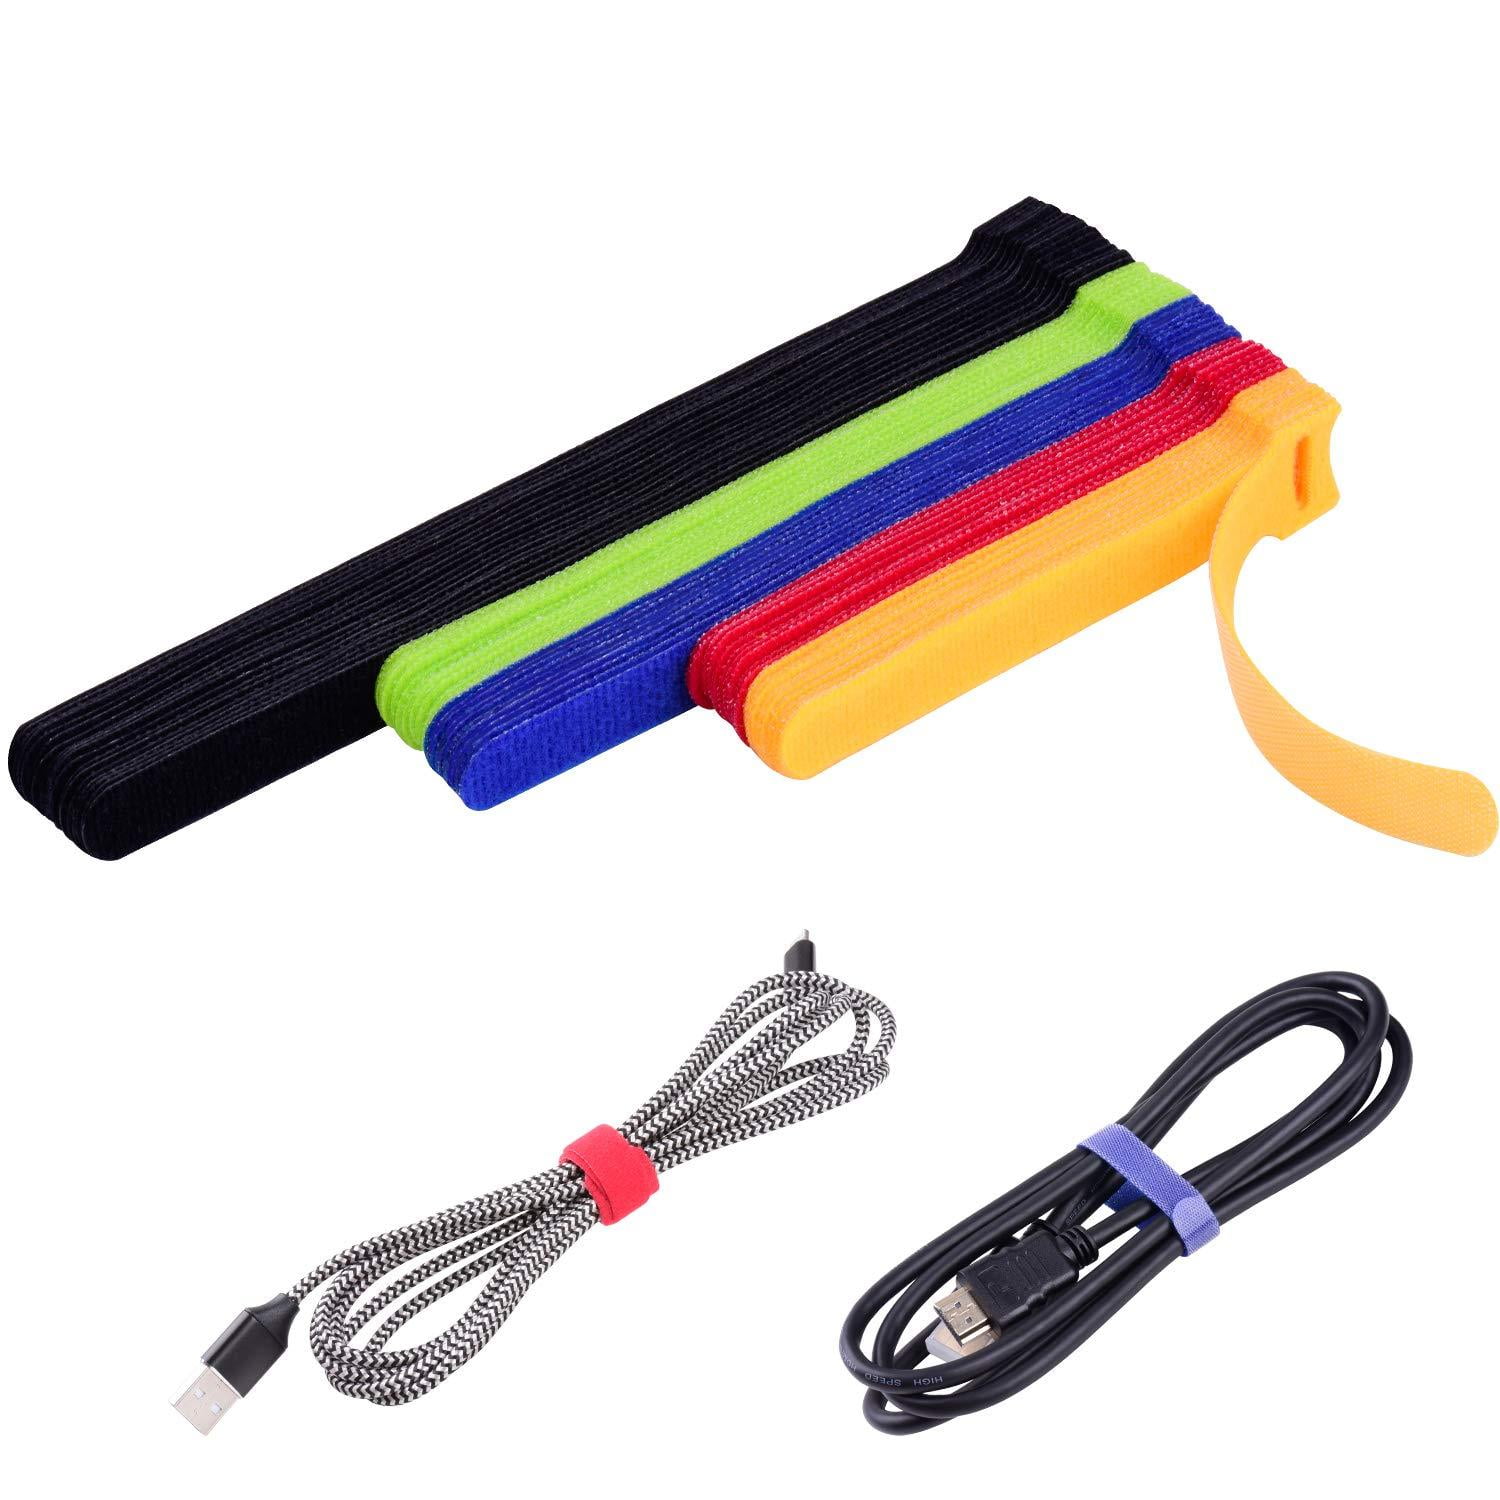 Cable Ties Reusable 20pcs Straps Adjustable Releasable Tidy Wrap Hook and Loop Long Large Strong for PC Computer Electronics 5 Color